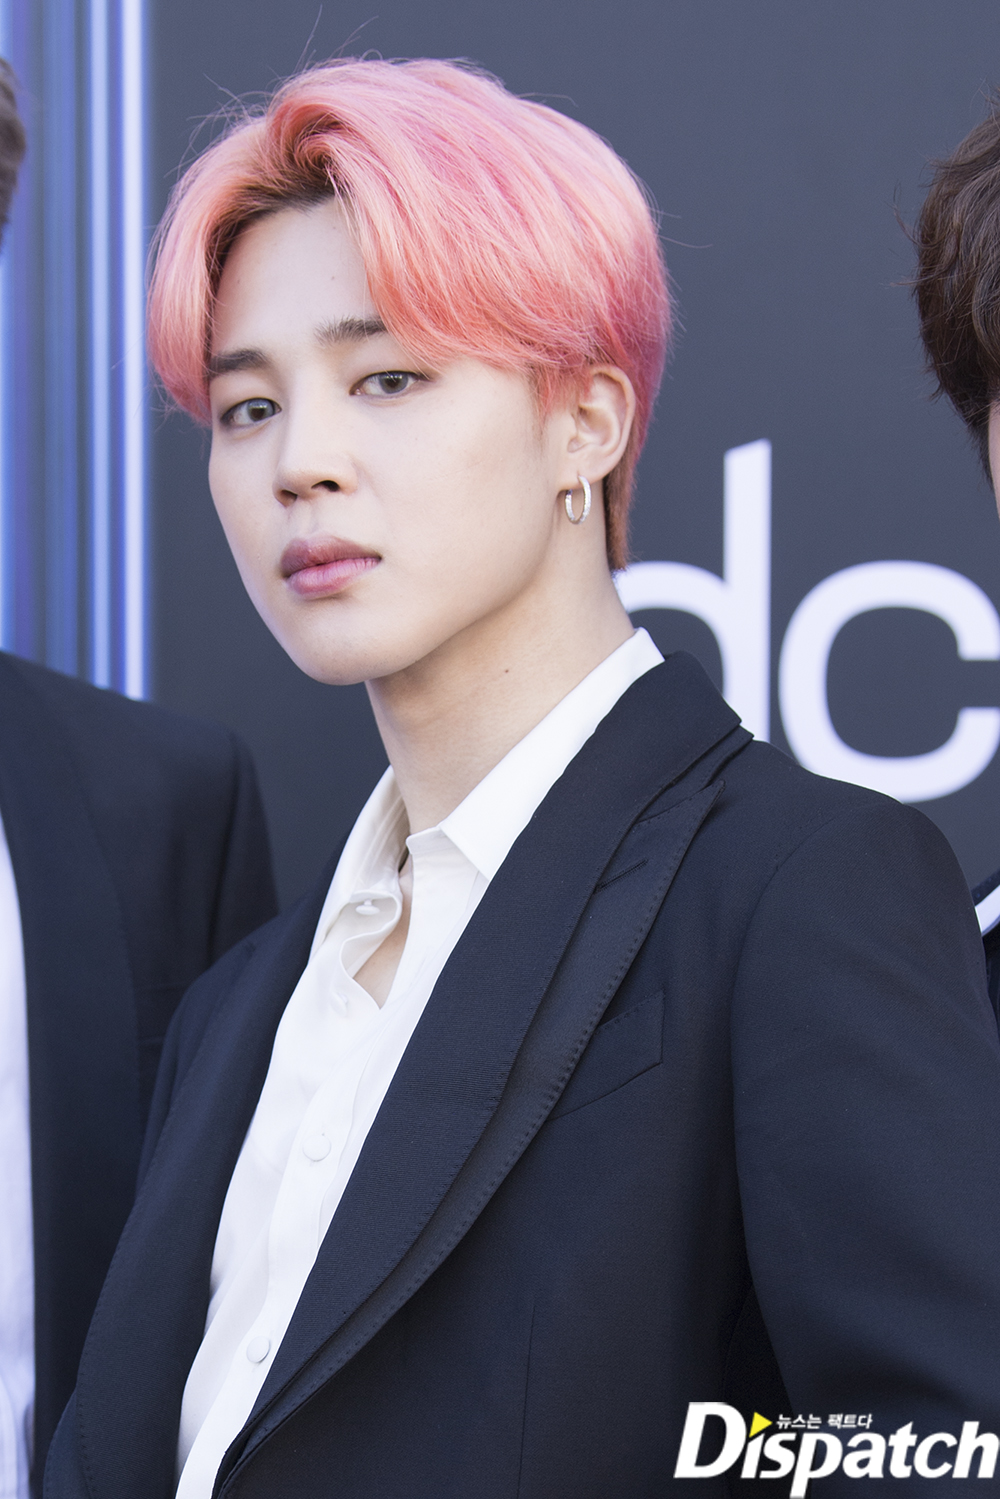 <p> BTS Jimin this cute charm pack.</p><p>Jimin is 2 days 8: 30 a.m.(Korean time) the United States Las Vegas MGM Grand Garden Arena opened in 2019 Billboards Music Awards red carpet stepped on.</p><p>Jimin is in this day Billboards for Happy Jump - Endless Arcade to get through. Foreign throughout the interview the cute expression on his face. Overseas media are Jimins look for you press the shutter.</p><p>Meanwhile, BTS is this day ‘2019 Billboards Music Awards’ in World Top Duo /Group sector. 3 consecutive years Top Social Artist award was also received.</p><p>Billboards Happy Jump - Endless Arcade</p><p>Charm bag</p><p>. No problem</p>